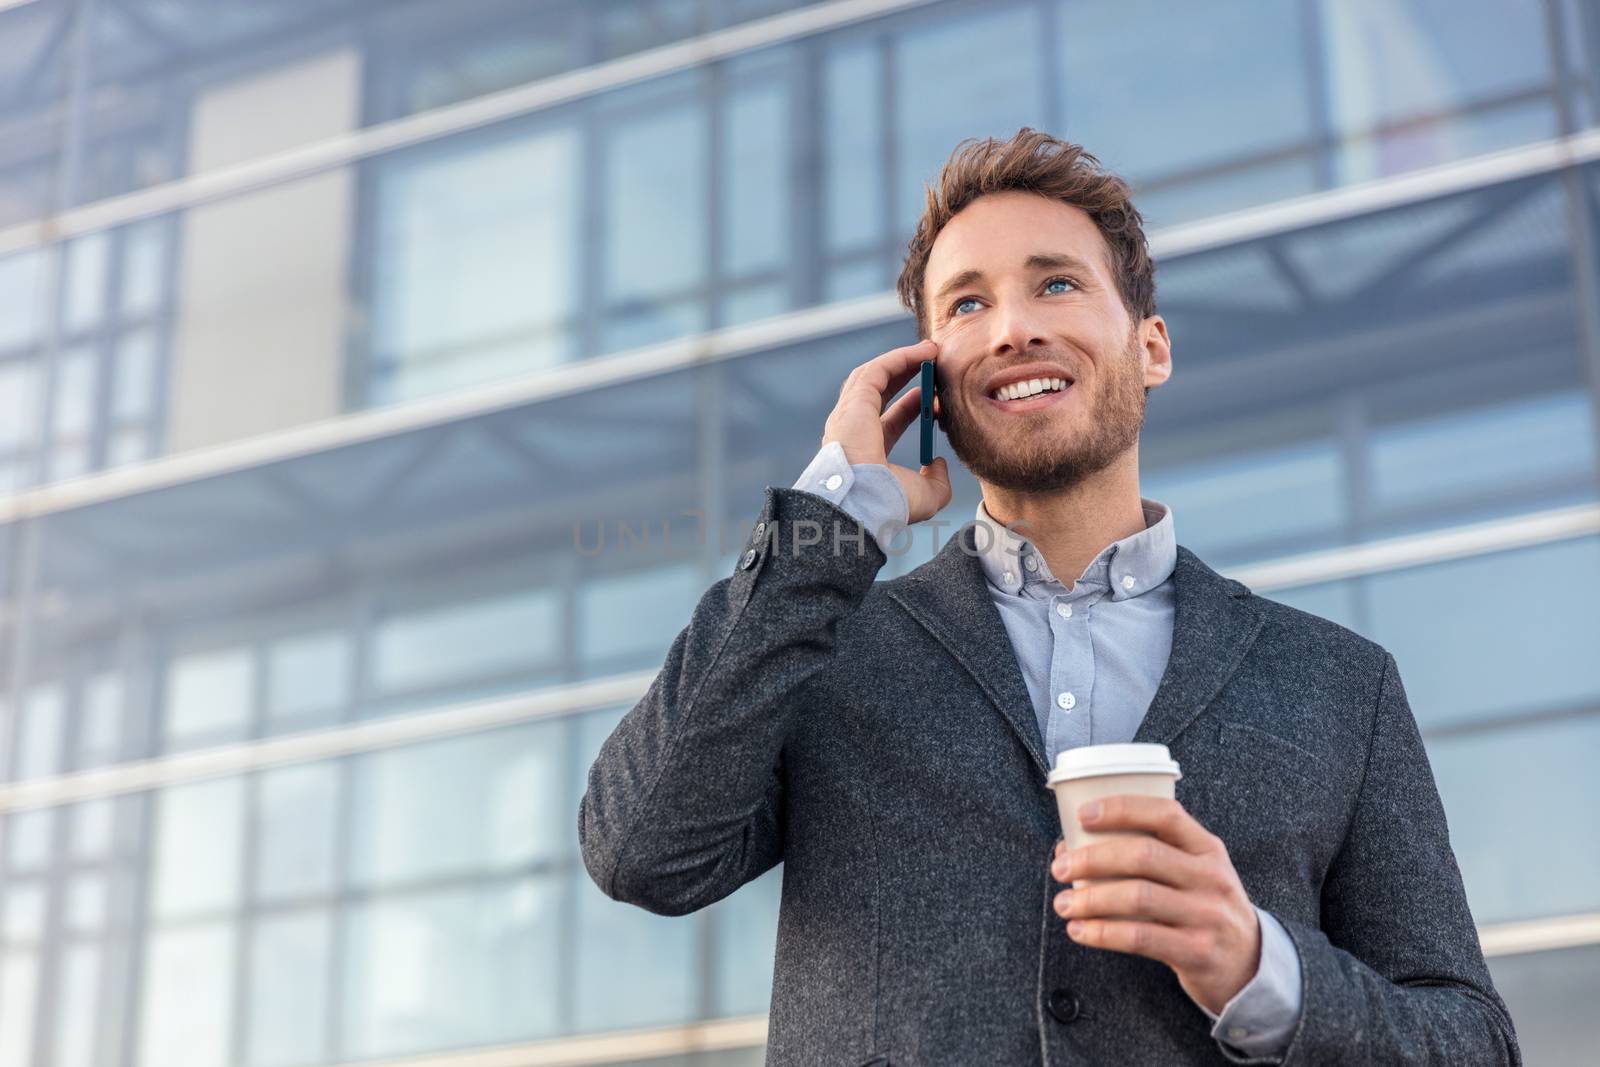 Man talking on smartphone. Businessman urban professional business man using mobile phone smiling drinking coffee at office building in city. Happy professional wearing suit jacket.